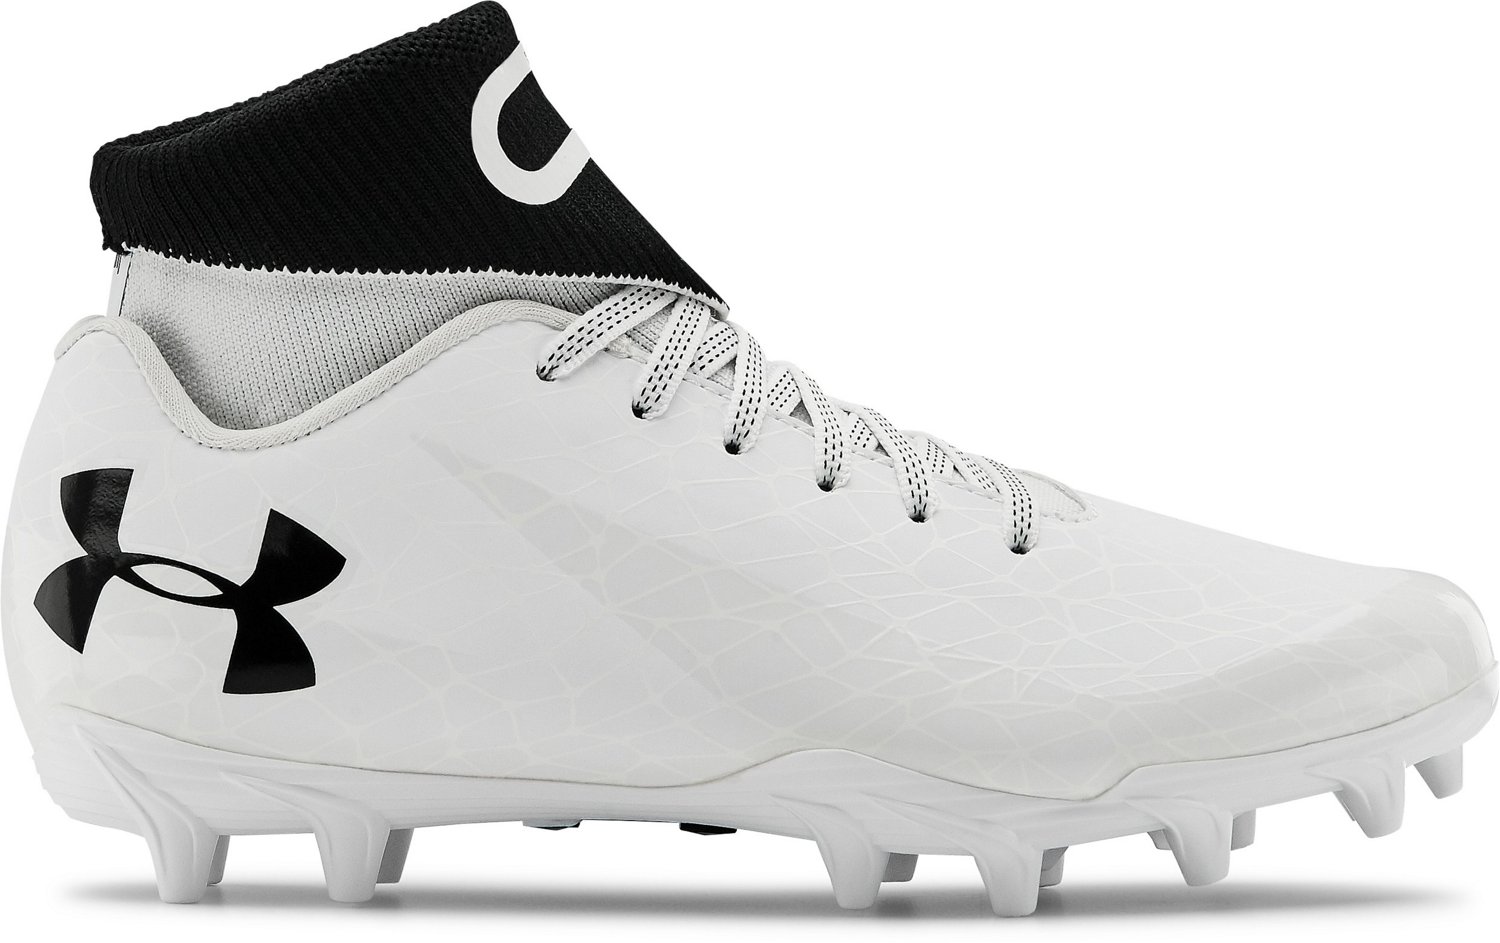 10c football cleats off 57 